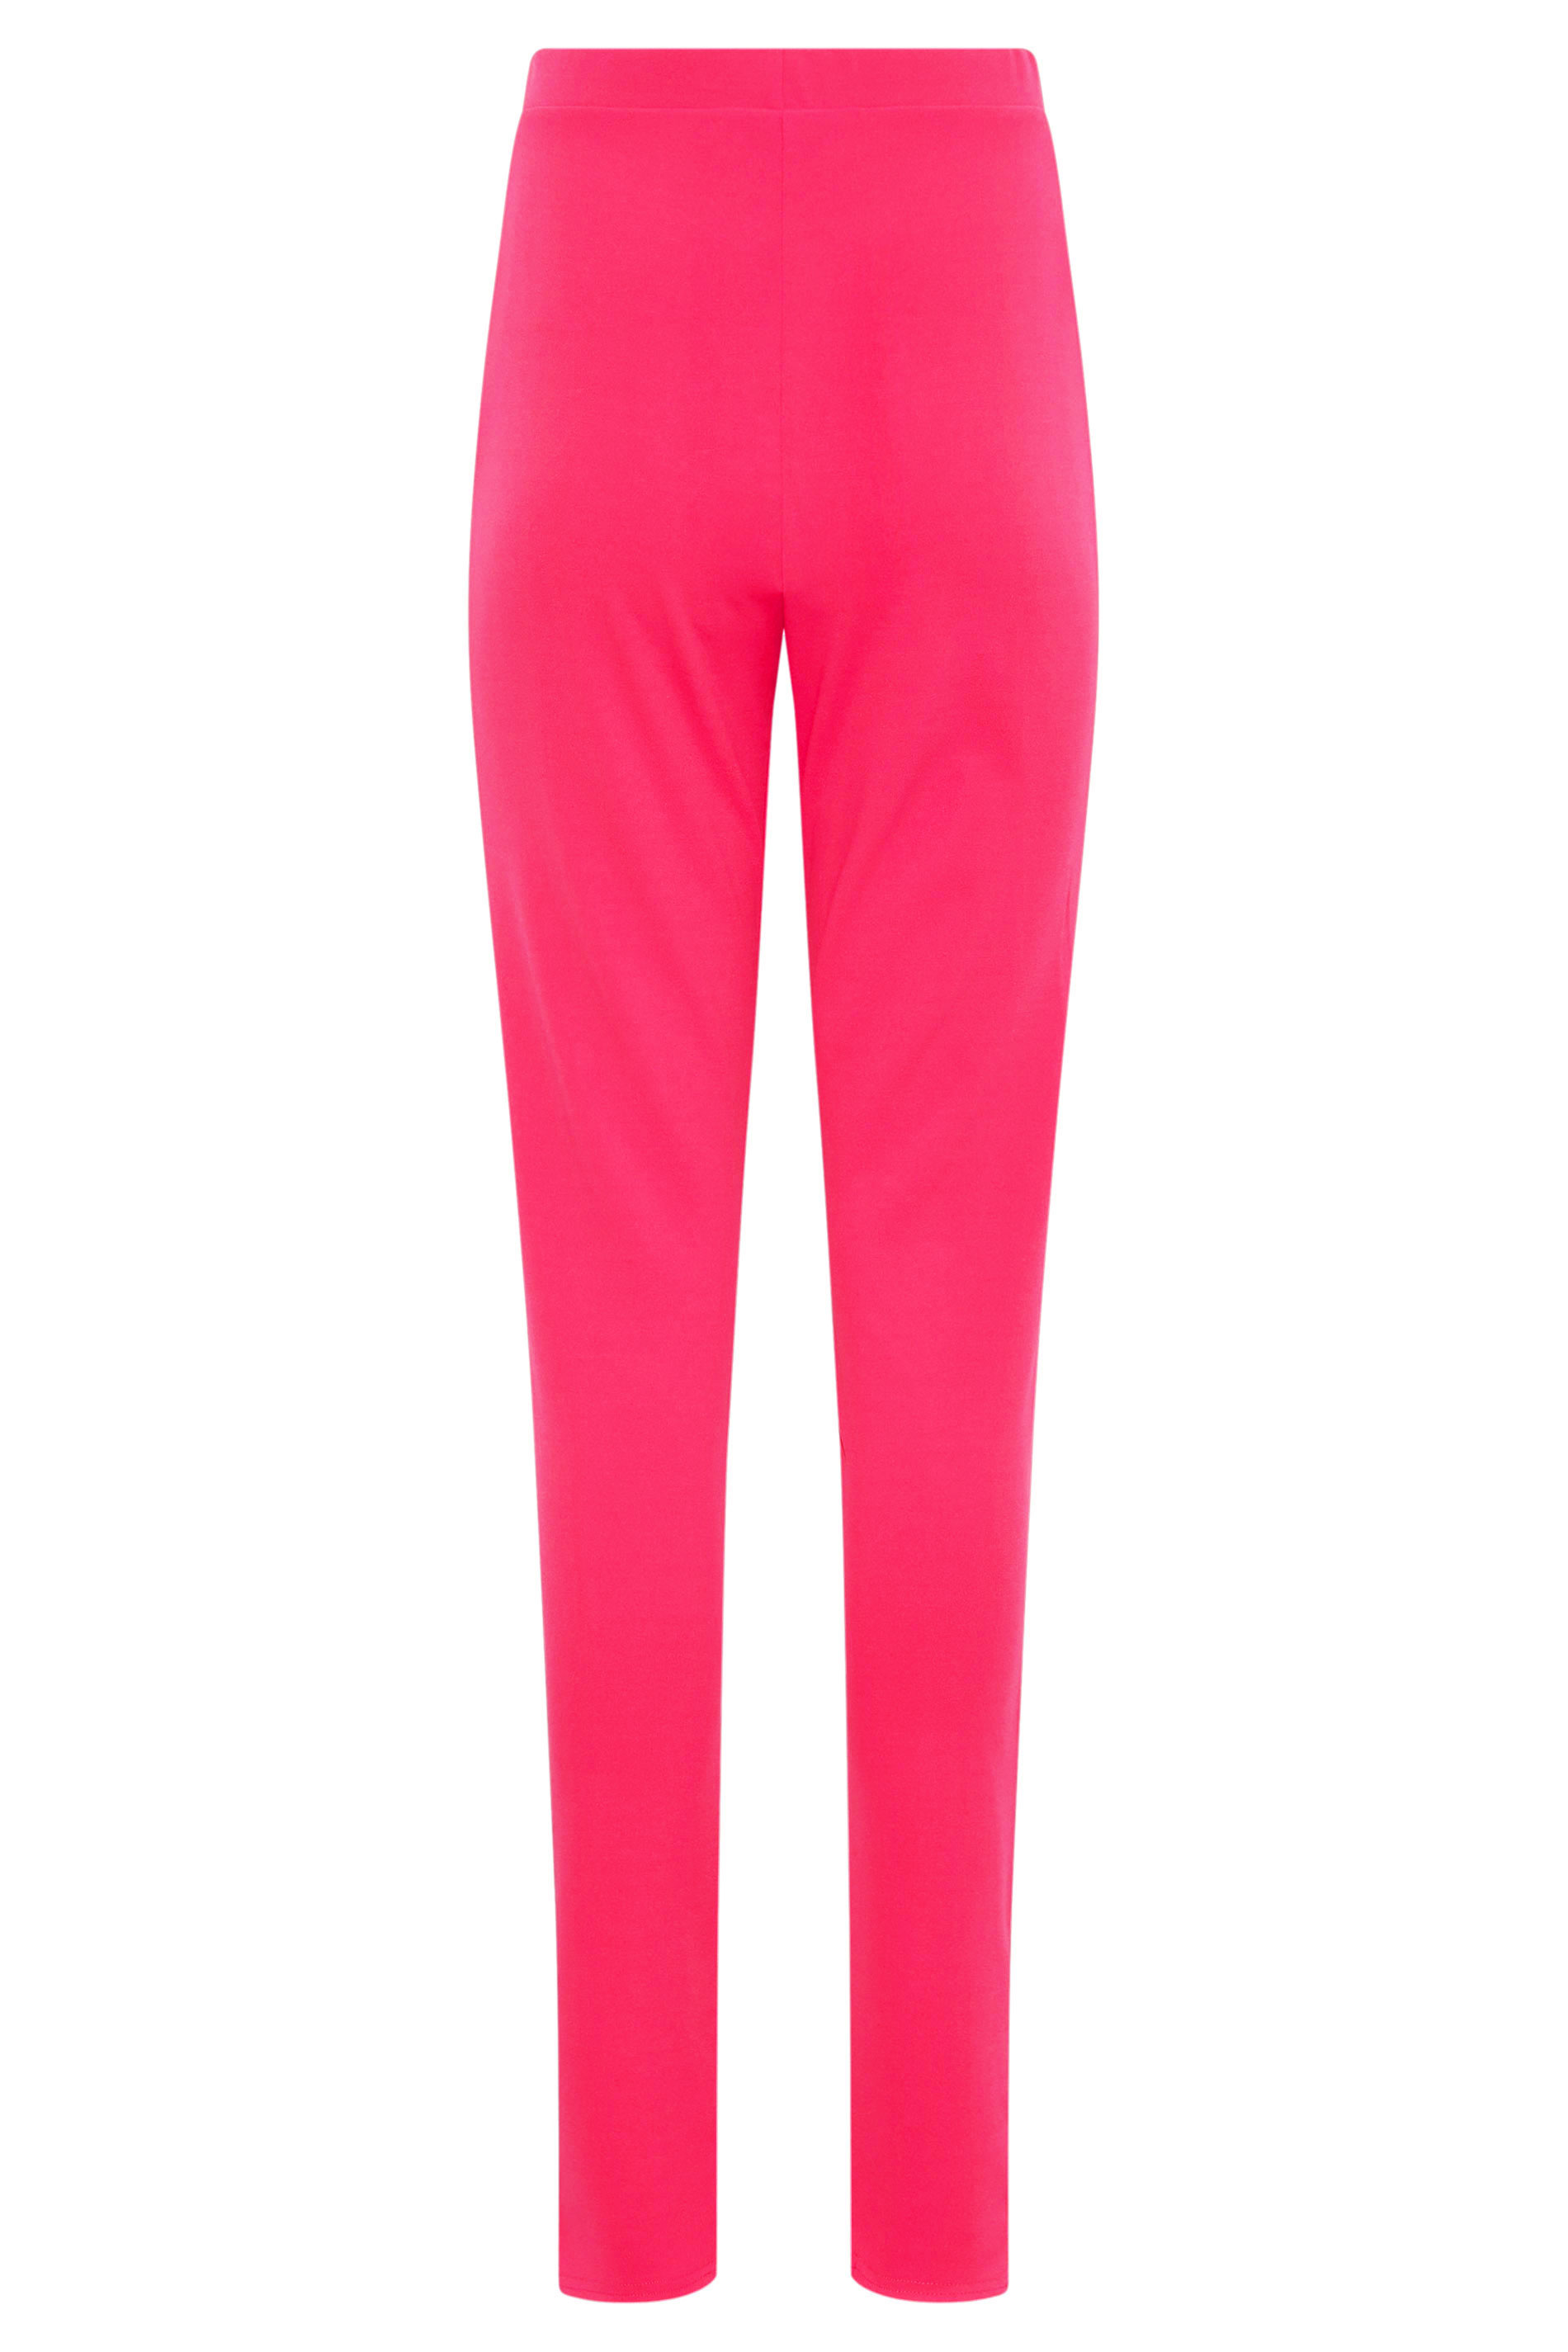 Twill utility trousers - Bright pink - Ladies | H&M IN